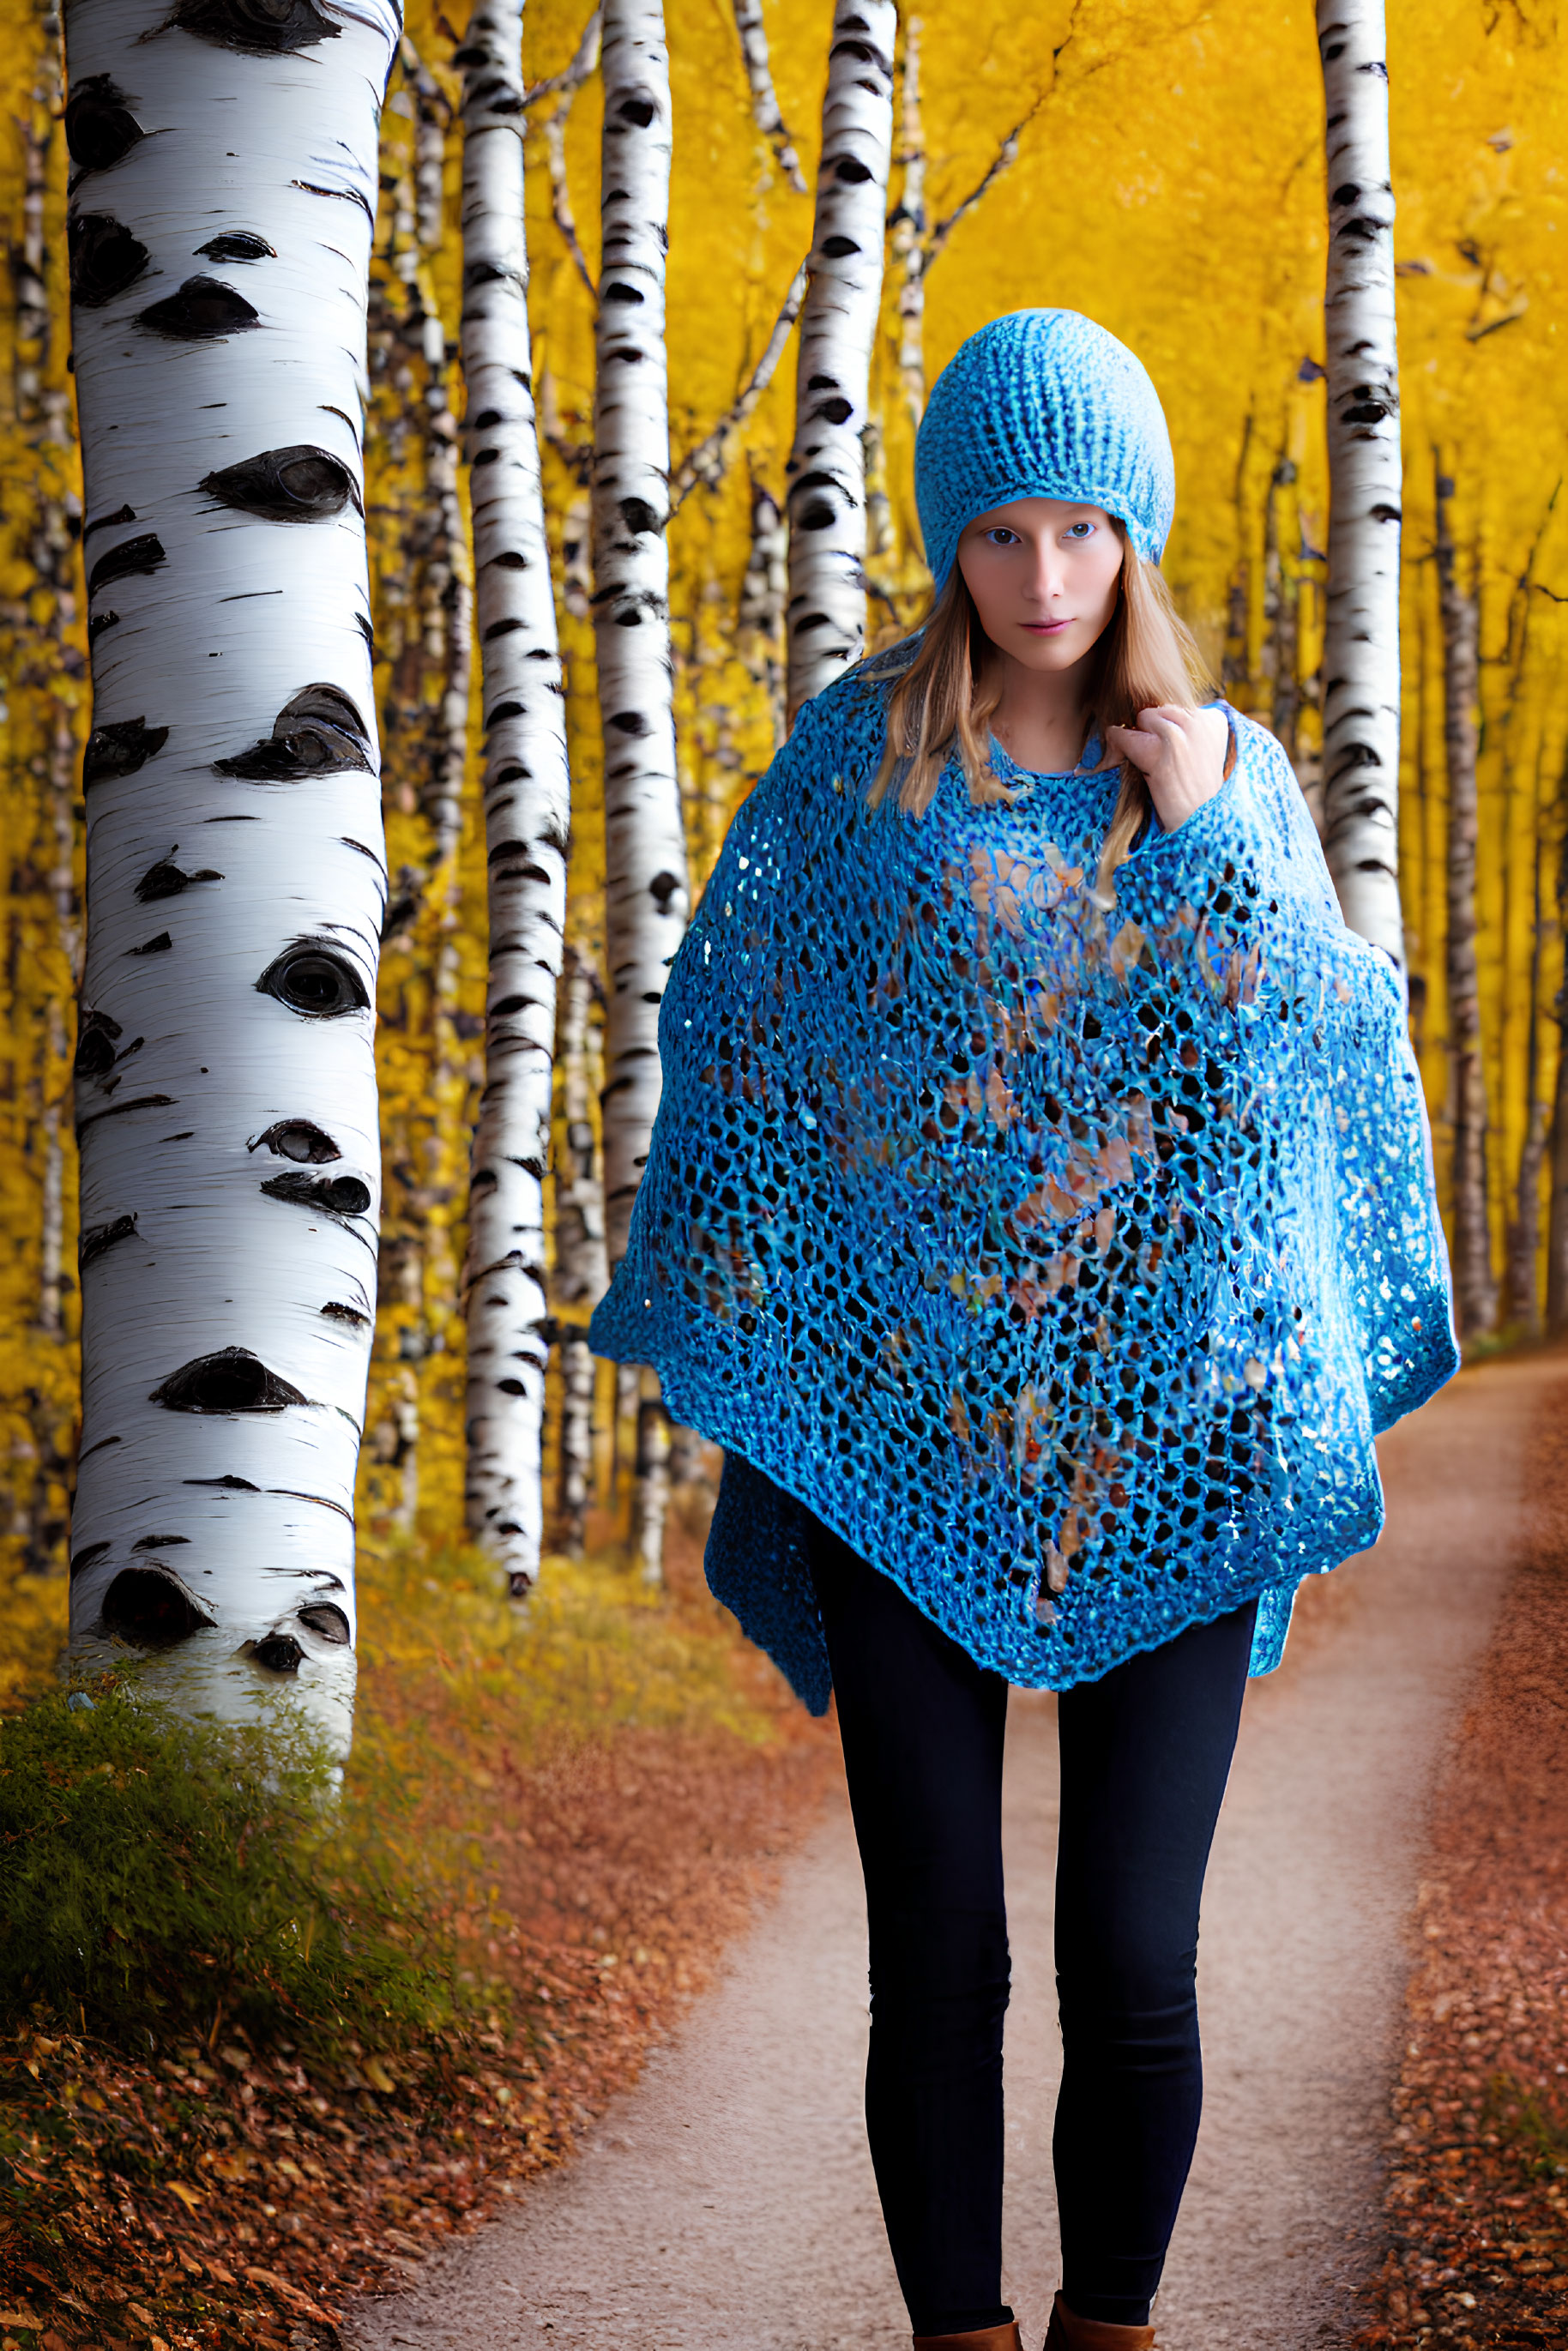 Woman in Blue Knitted Hat and Shawl on Forest Path with Autumn Leaves